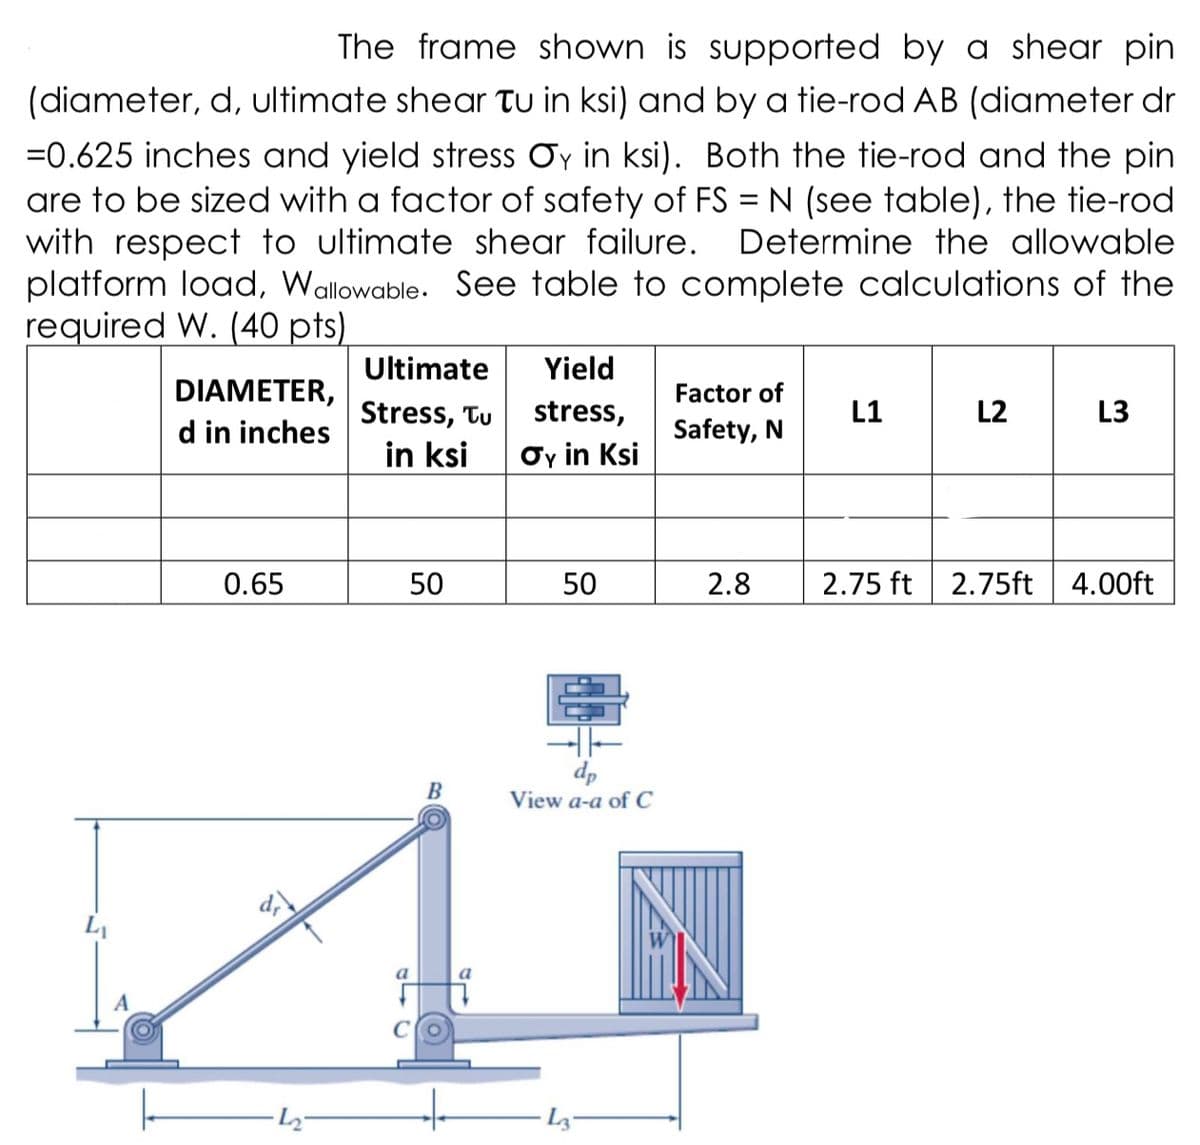 The frame shown is supported by a shear pin
(diameter, d, ultimate shear tu in ksi) and by a tie-rod AB (diameter dr
=0.625 inches and yield stress Oy in ksi). Both the tie-rod and the pin
are to be sized with a factor of safety of FS = N (see table), the tie-rod
with respect to ultimate shear failure.
platform load, Wallowable. See table to complete calculations of the
required W. (40O pts).
Determine the allowable
Ultimate
Yield
DIAMETER,
Factor of
Stress, Tu
stress,
L1
L2
L3
d in inches
Safety, N
in ksi
Oy in Ksi
0.65
50
50
2.8
2.75 ft
2.75ft
4.00ft
dp
View a-a ofC
B
LI
a
Lz-
